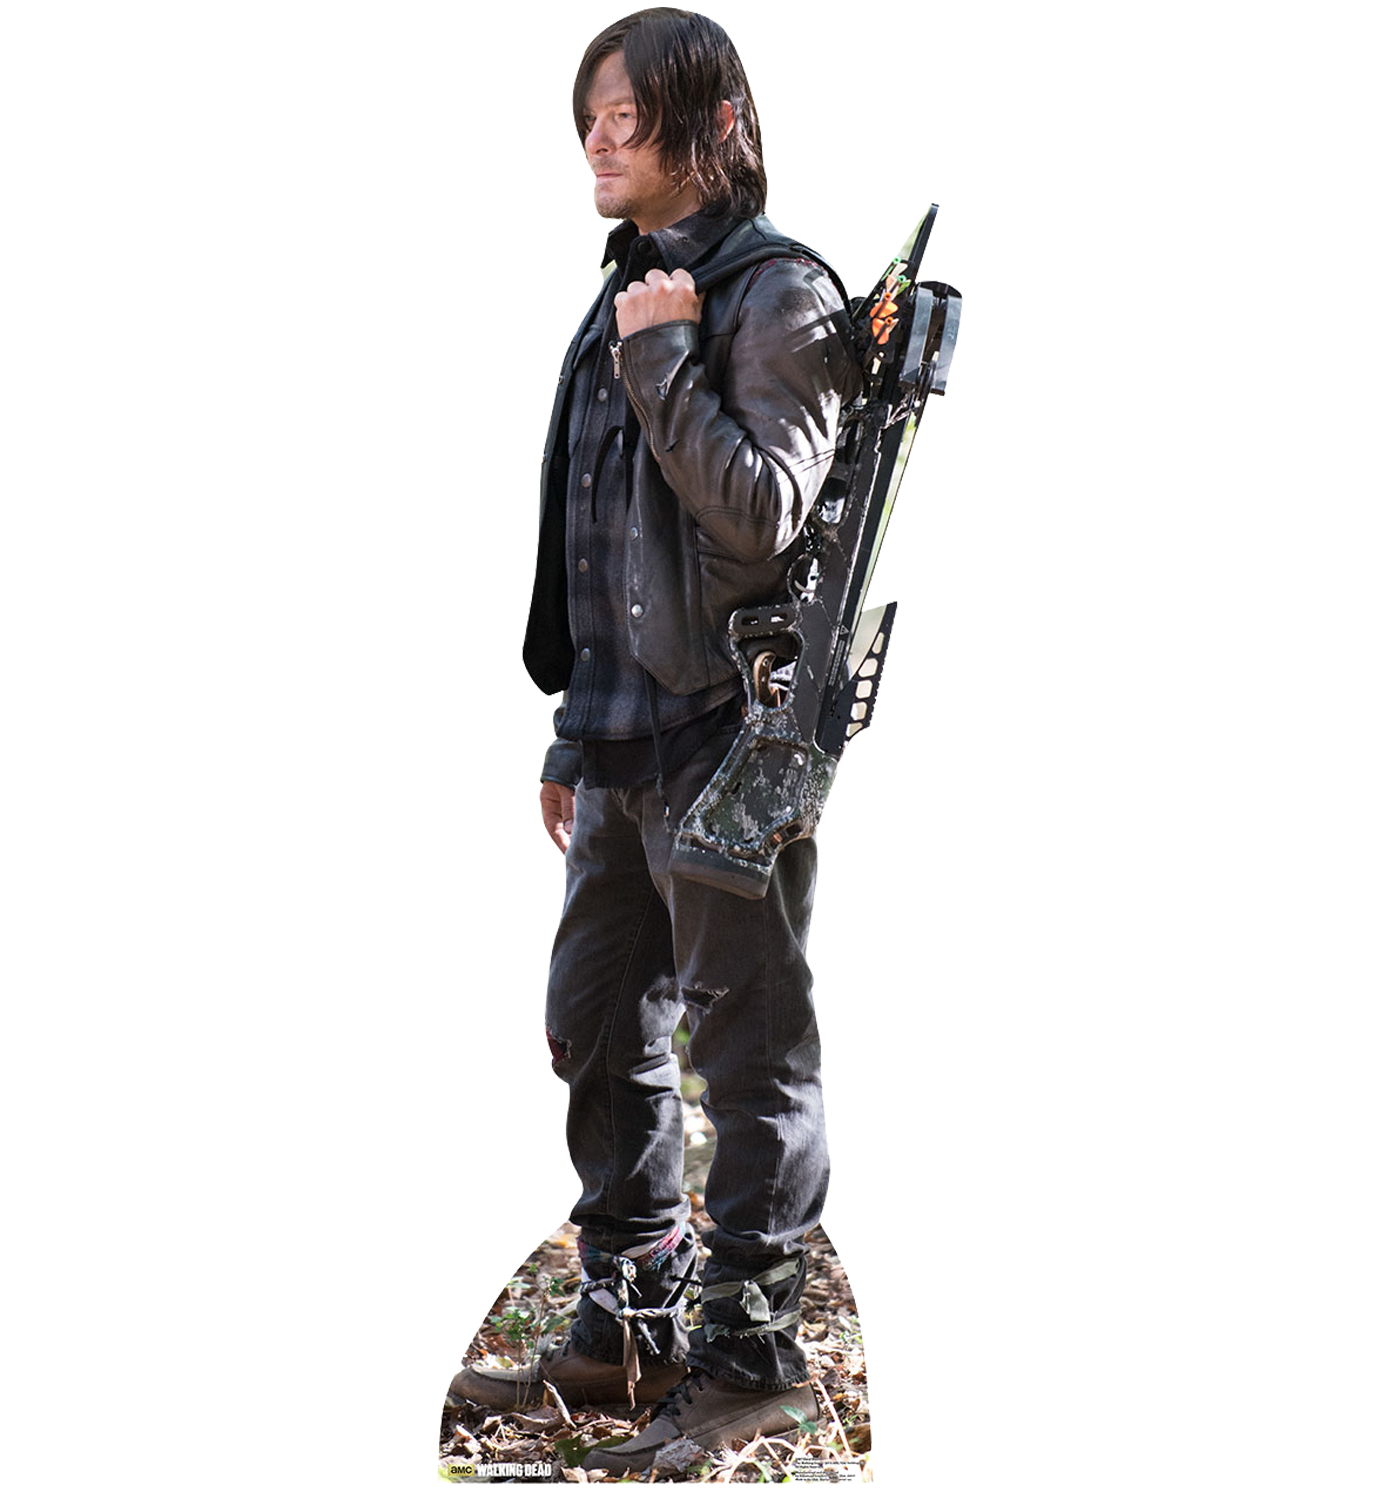 The Walking Dead Daryl with Crossbow 02 Cardboard Cut Out Standee